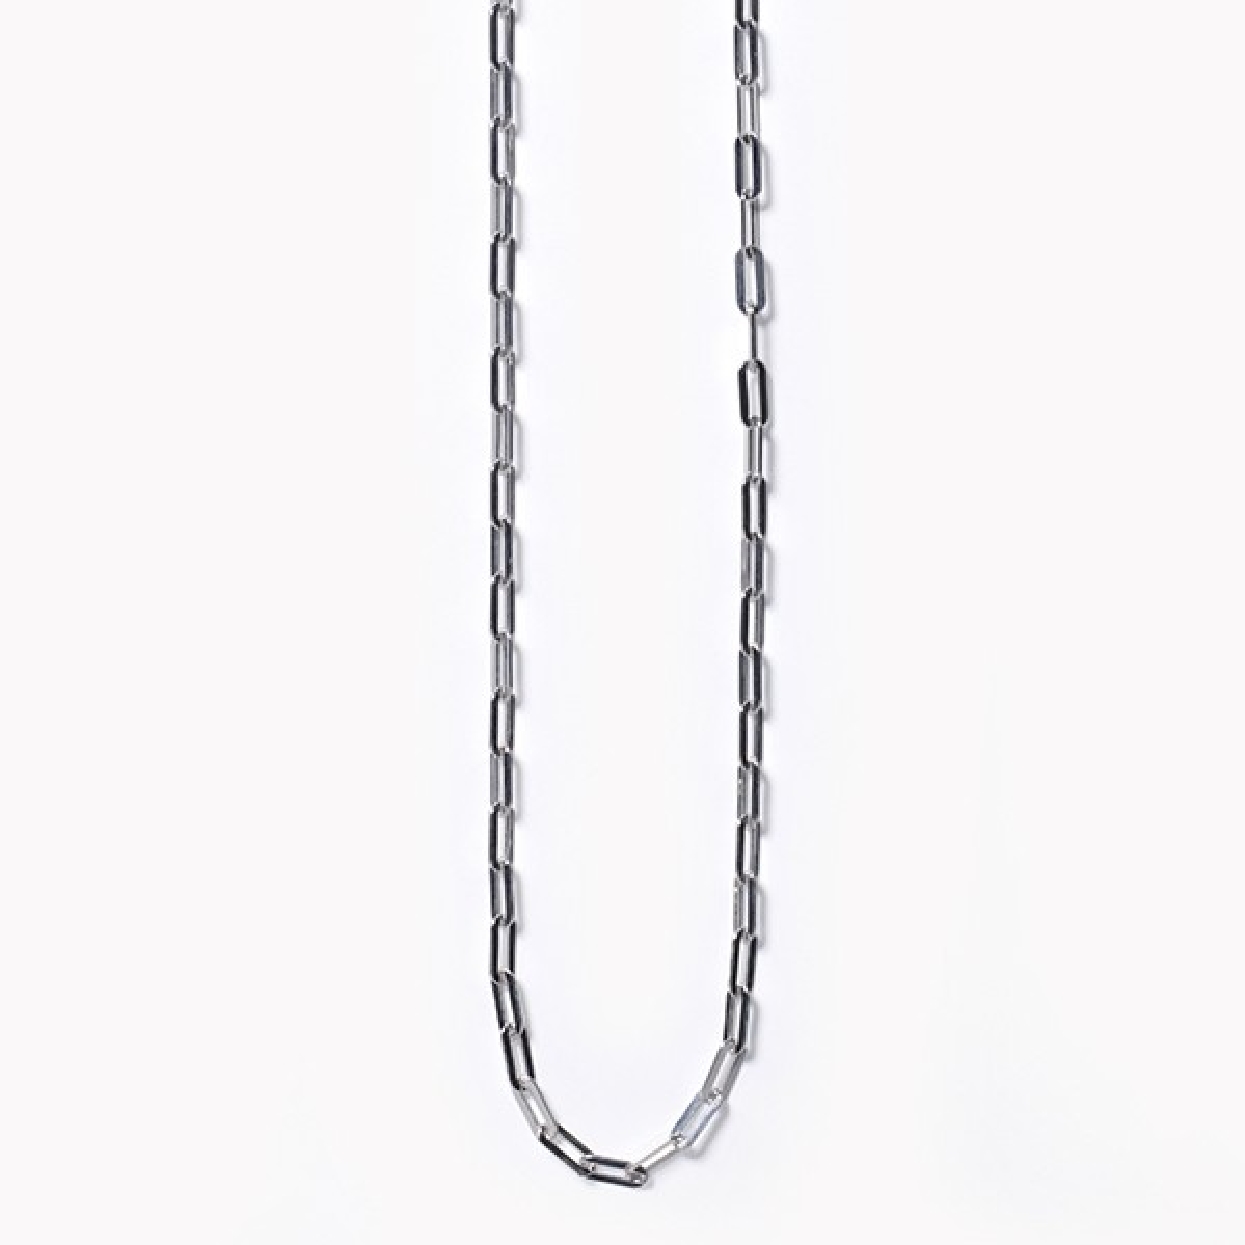 Southern Gates Sterling Silver Contemporary Rectangle Paperclip Necklace; 24 inches

KAR603/24